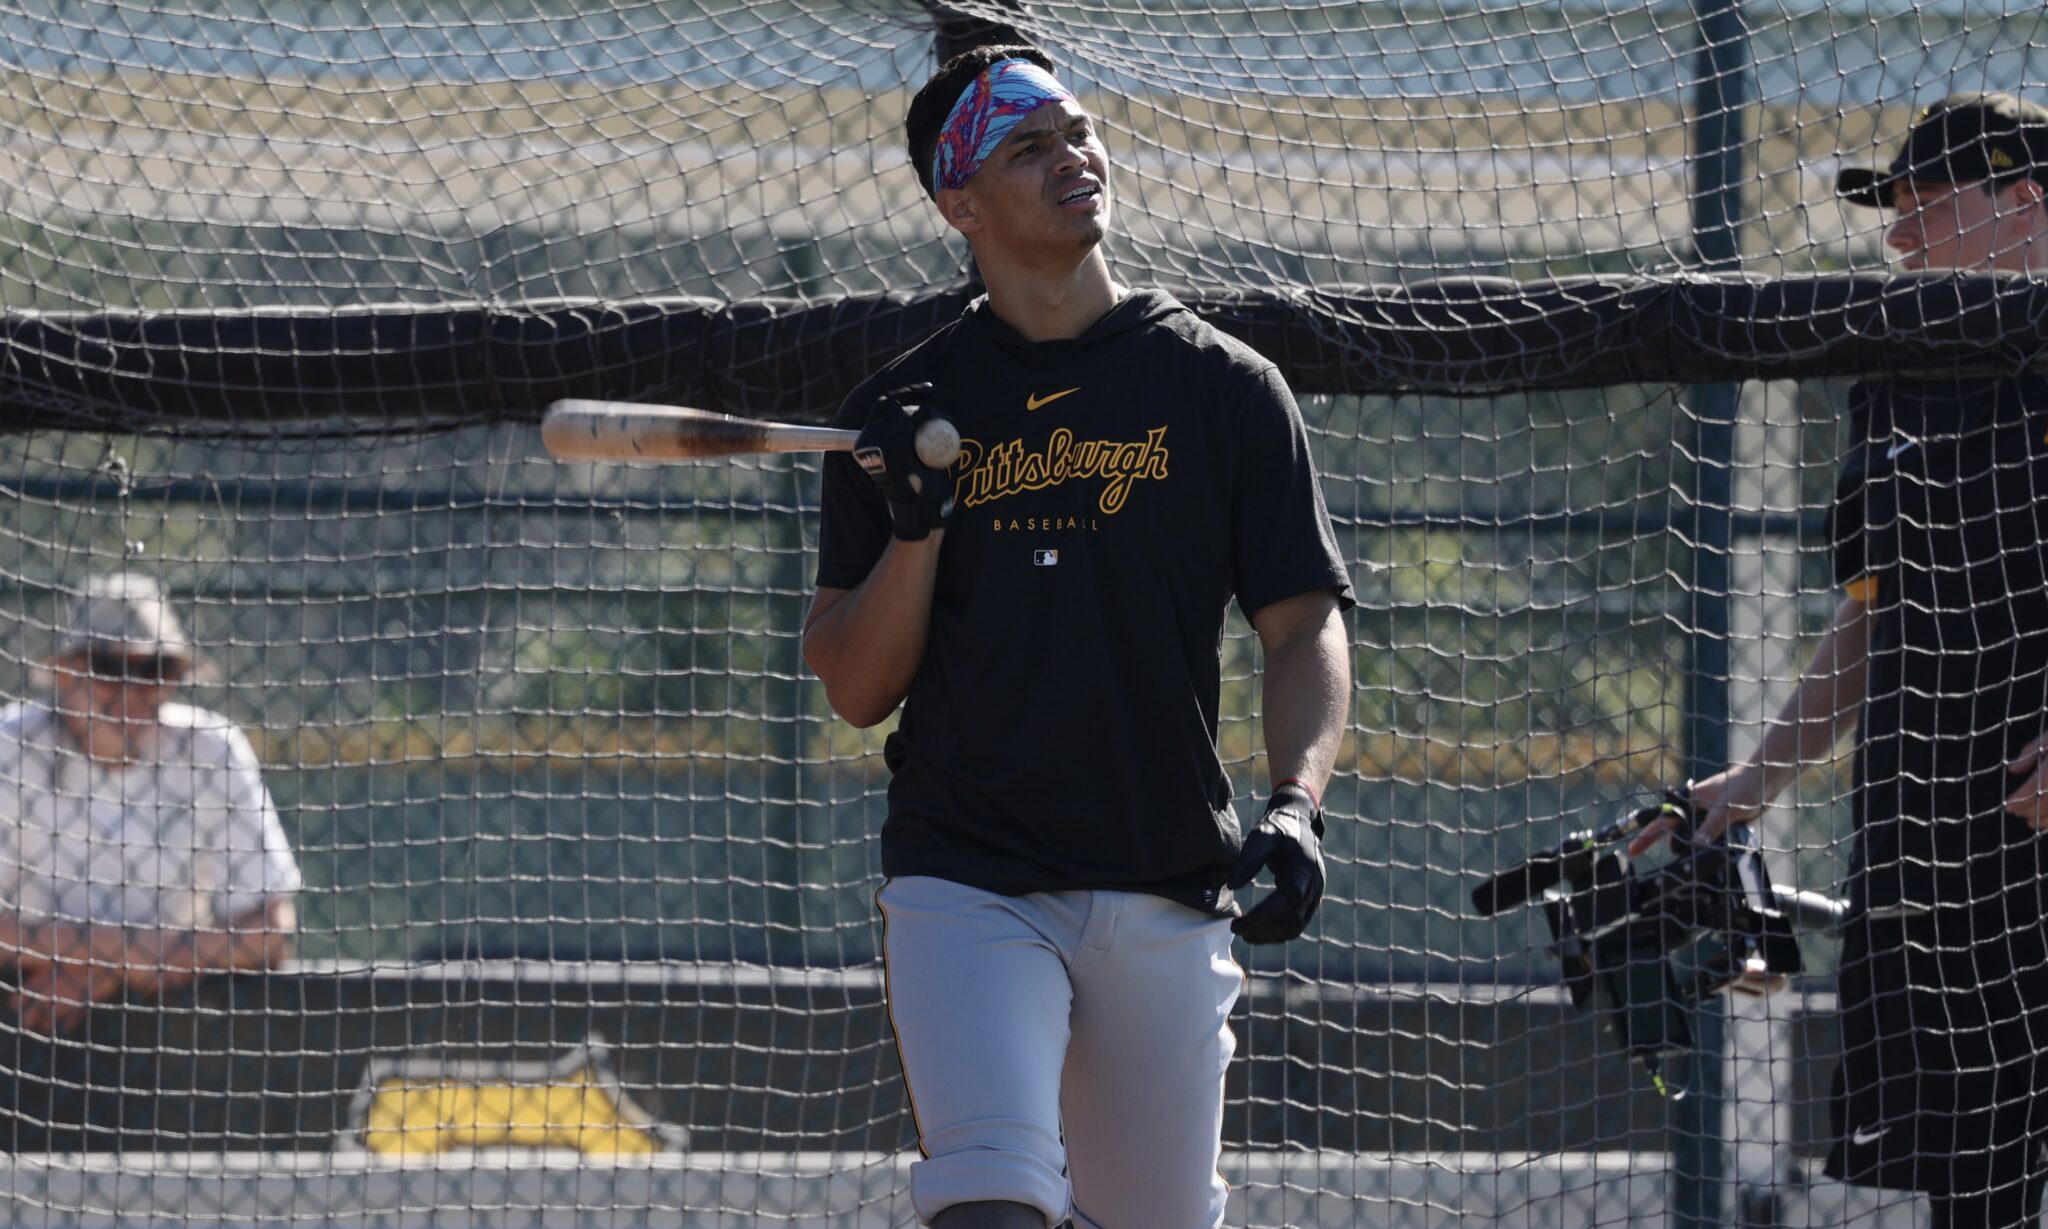 Pirates continue to trim Spring Training roster ahead of MLB